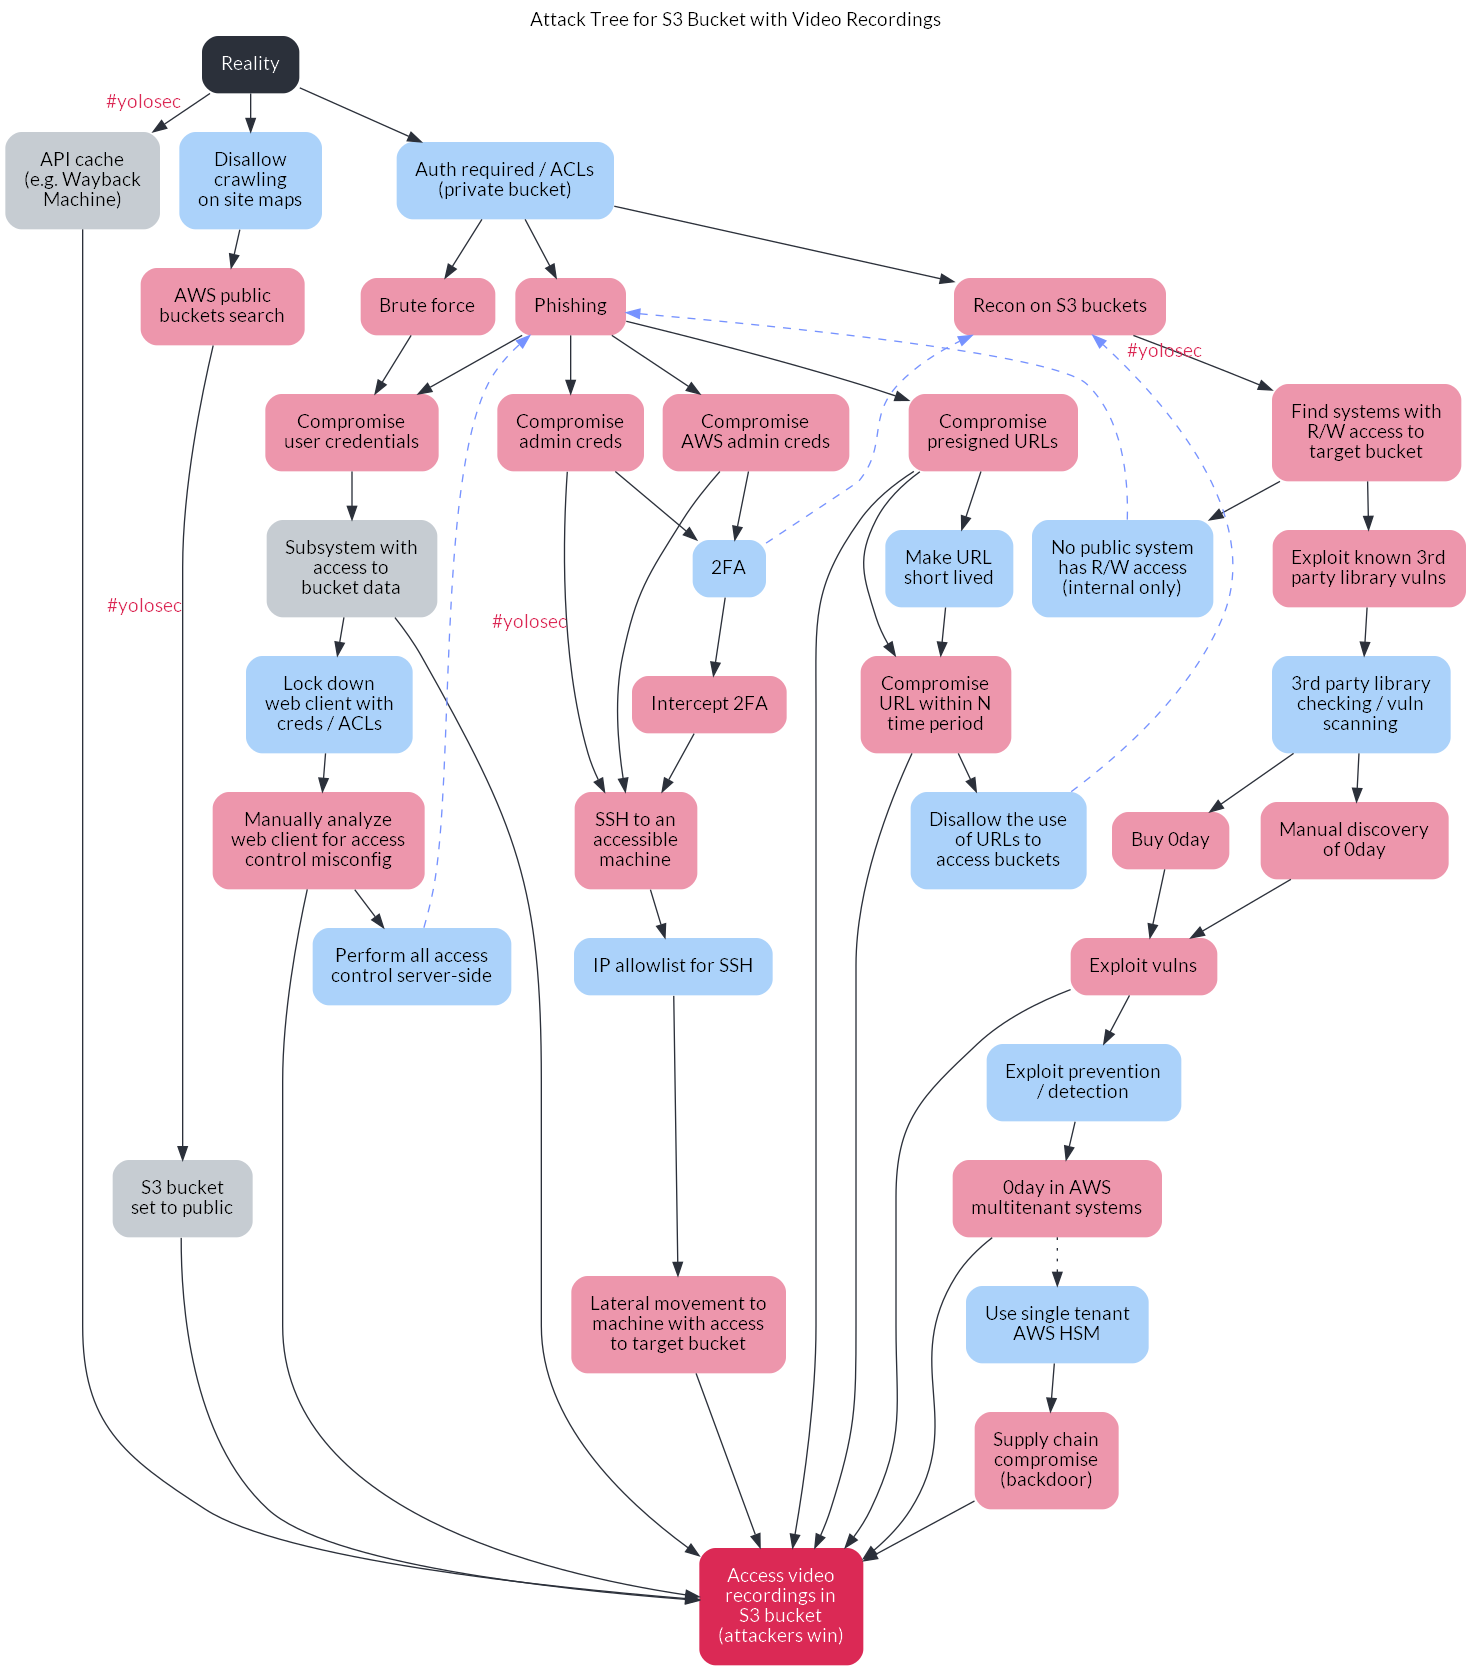 The final decision tree for threat modeling an S3 bucket containing sensitive data